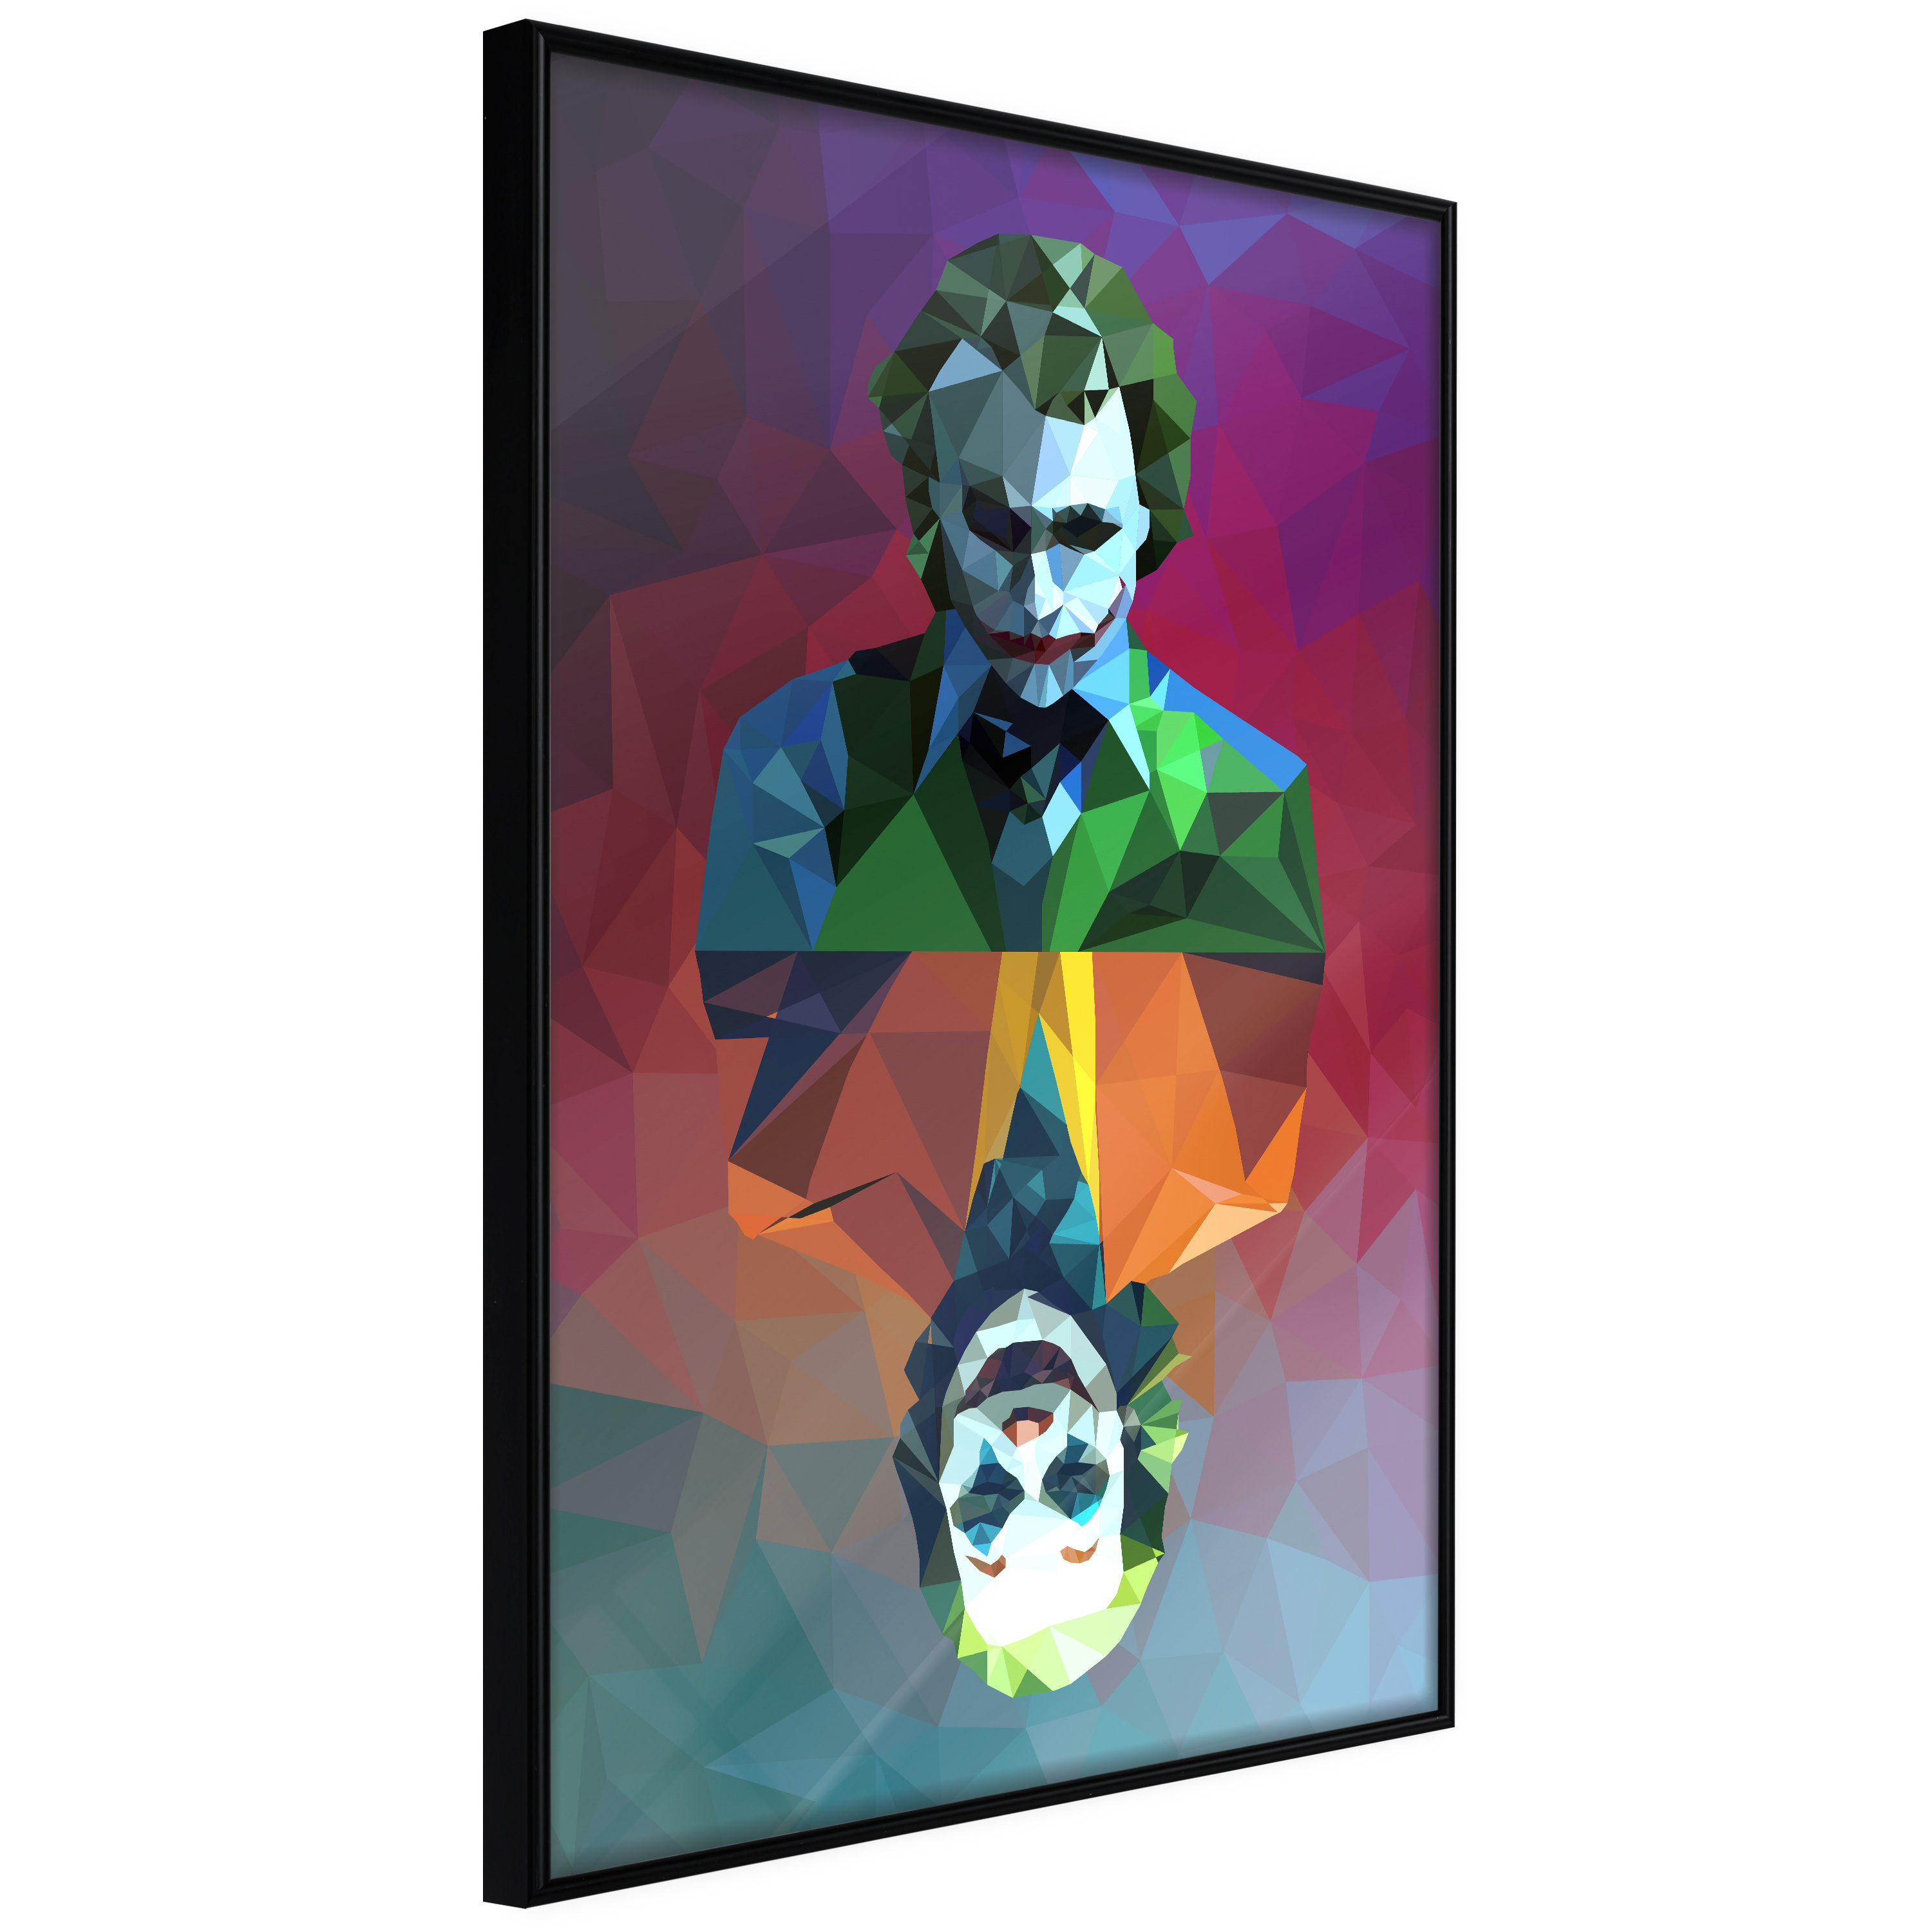 Poster - Two Faces of a Villain - 20x30